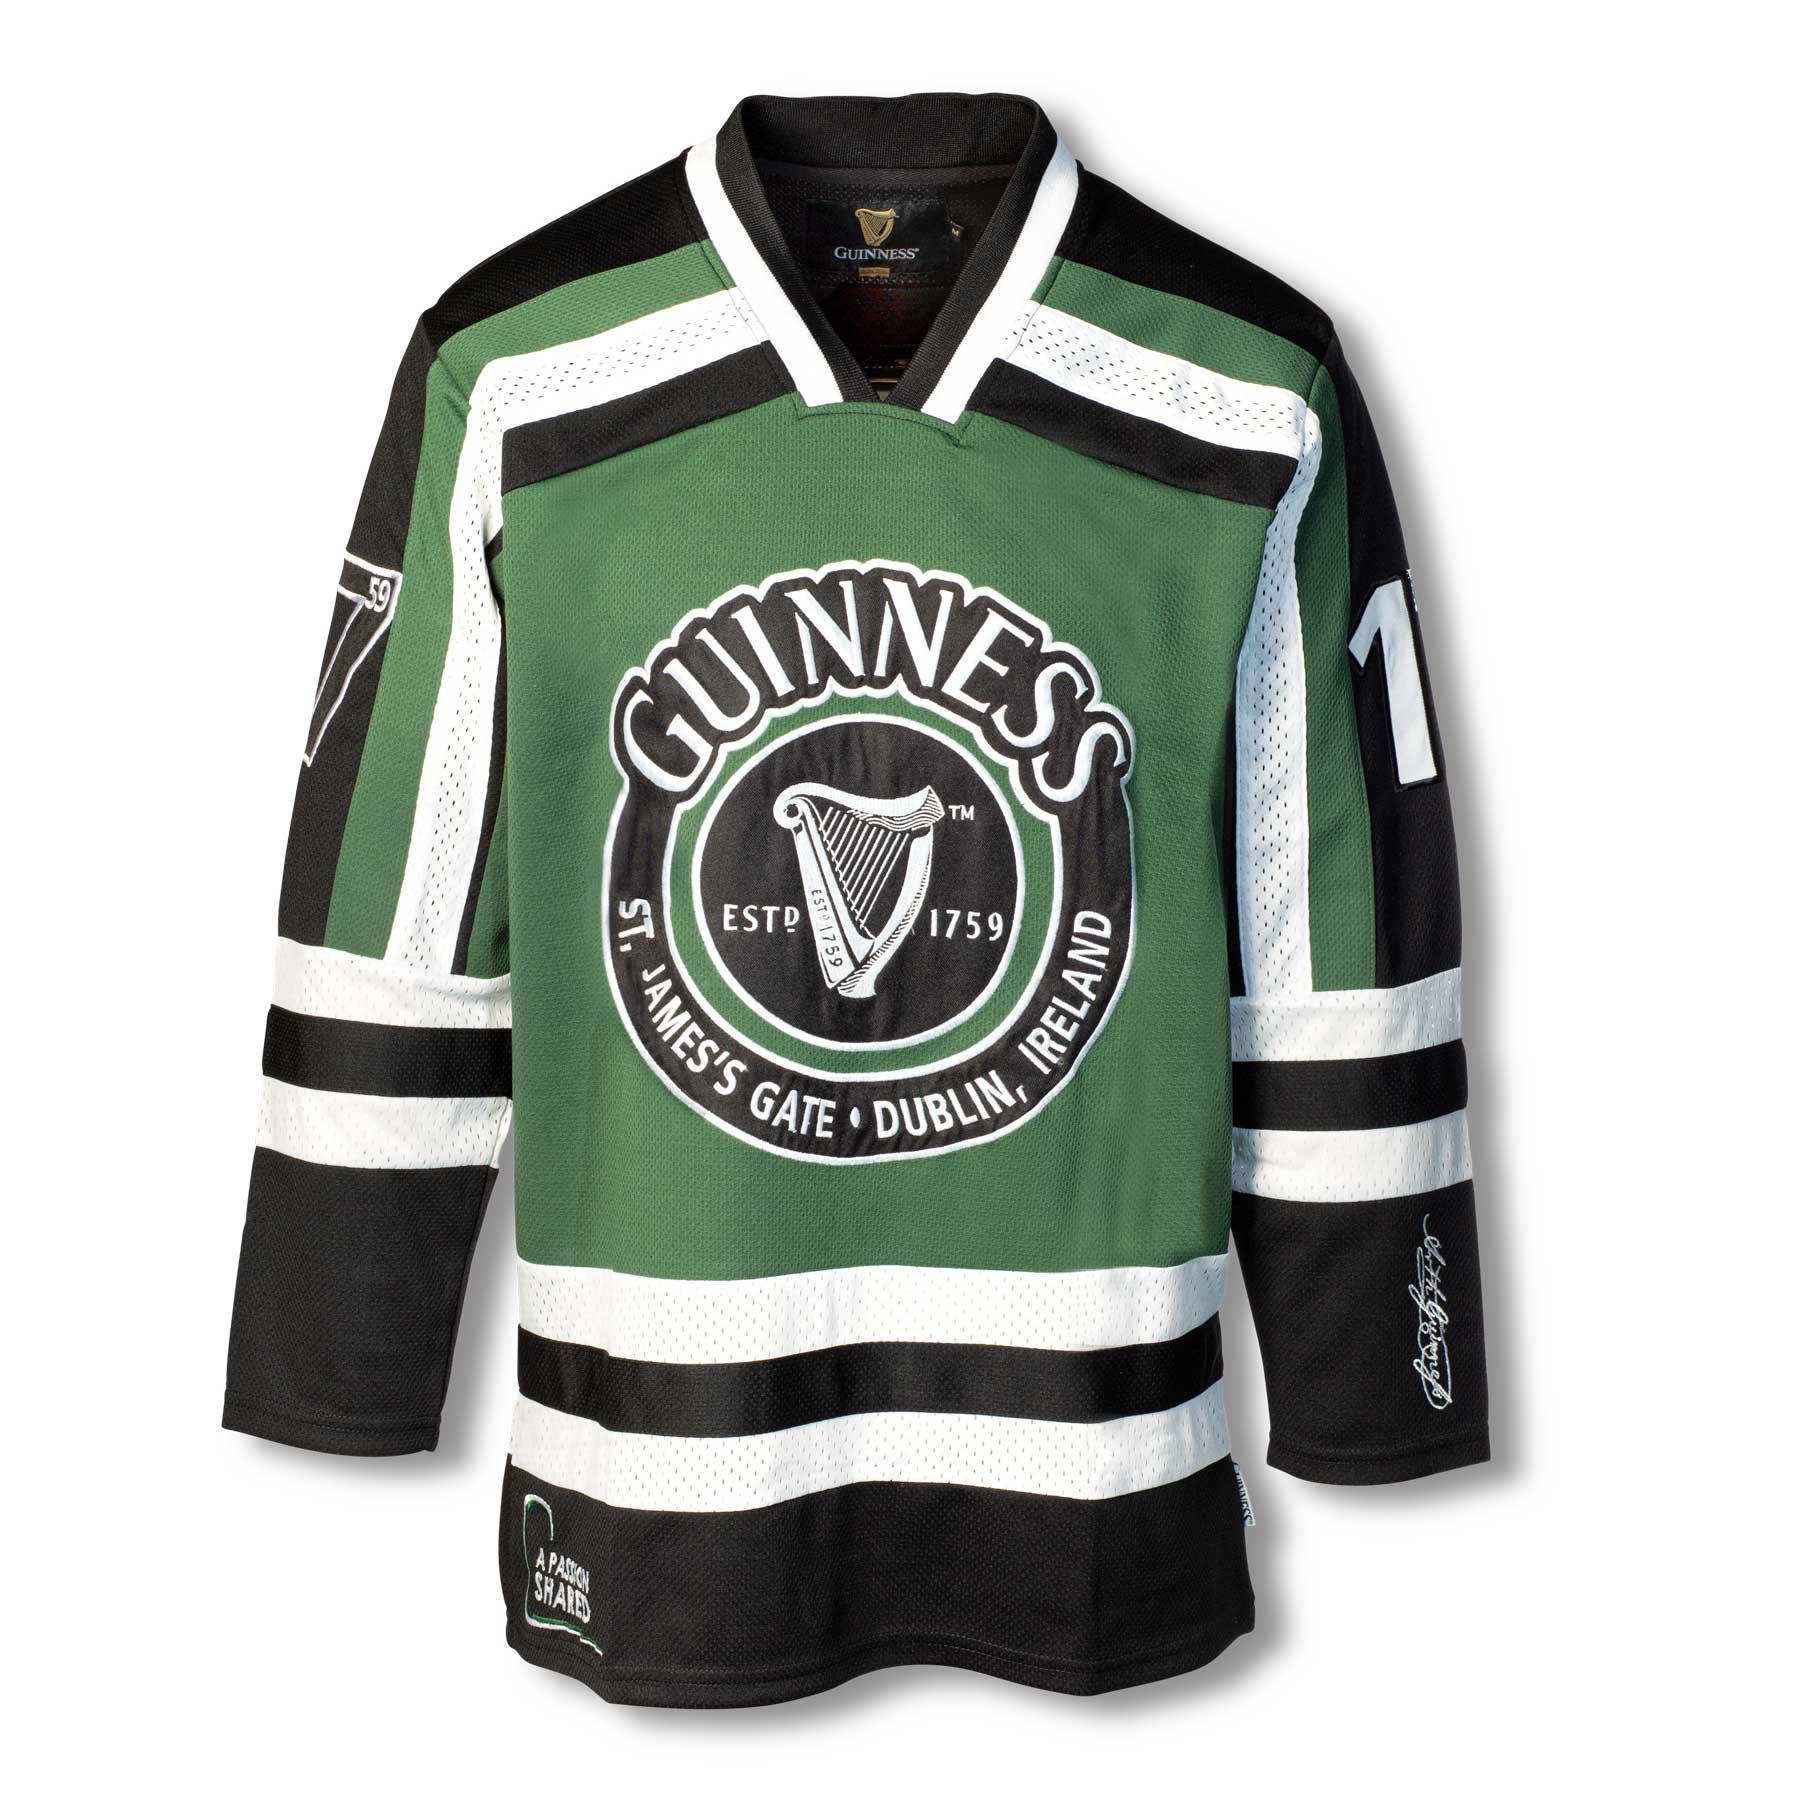 Guinness Green and White Men's Hockey Jersey Large